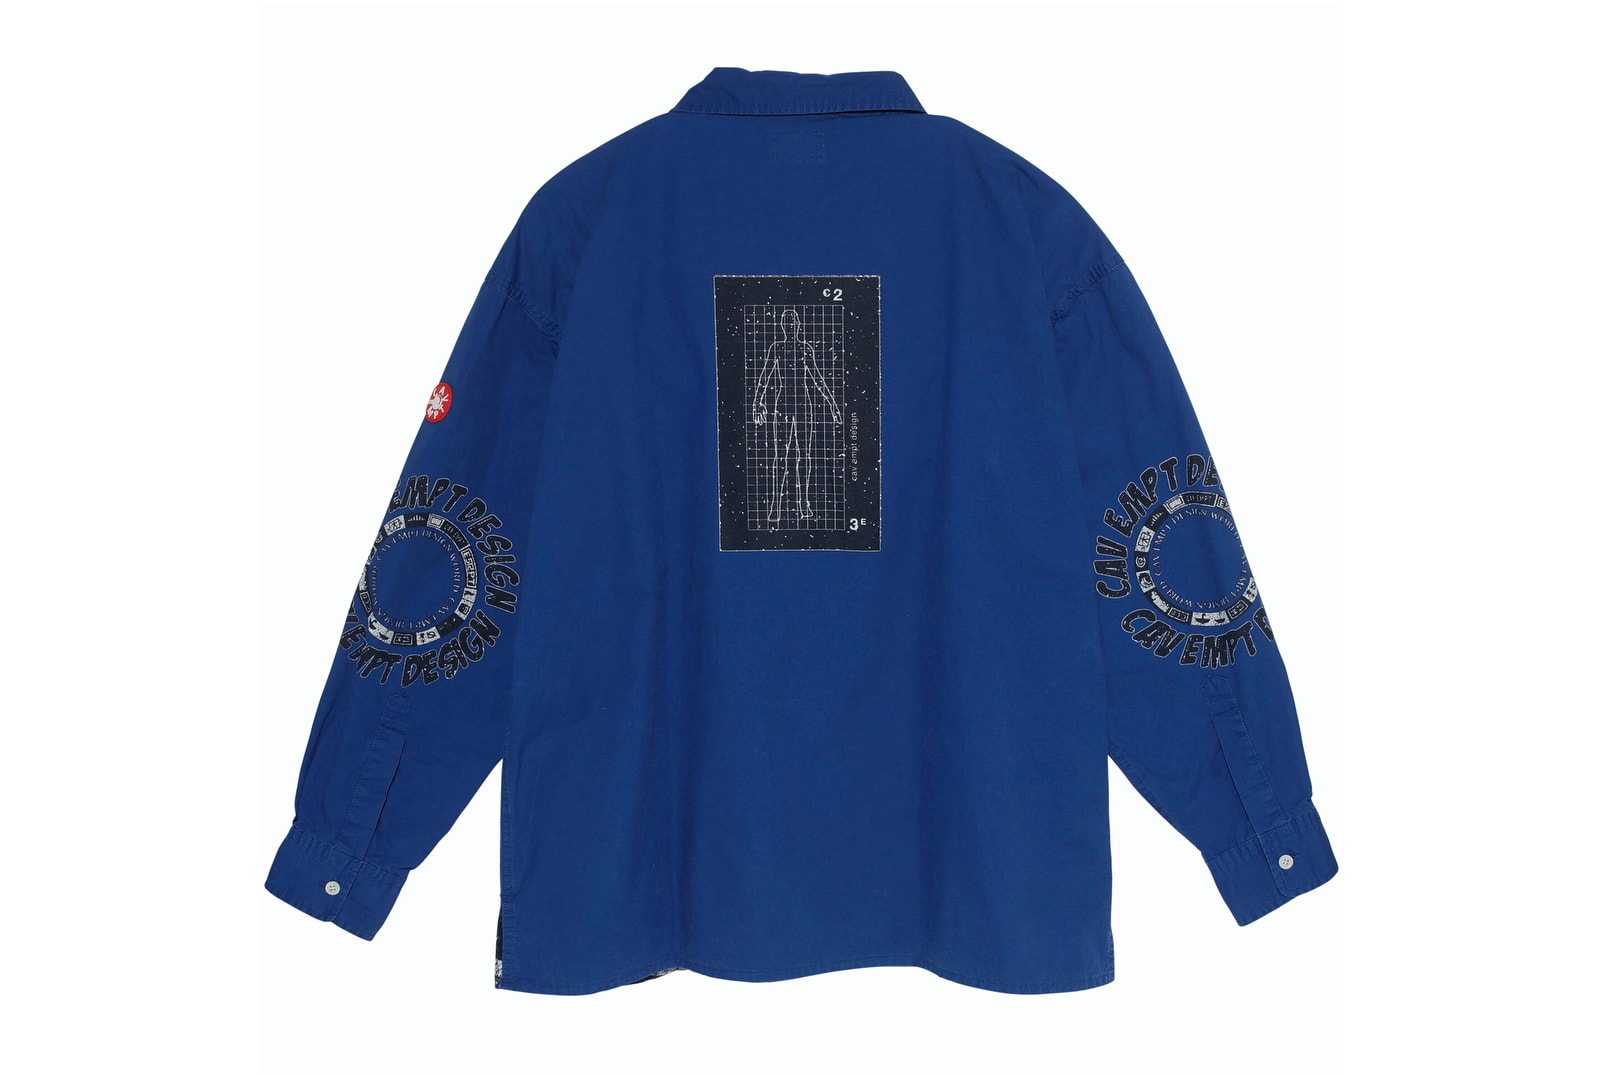 Cav empt big oversized zipper shirts orange navy graphic tony feltwell sk8thing fall winter 2018 print august 24 2018 release date drop buy sale sell purchase